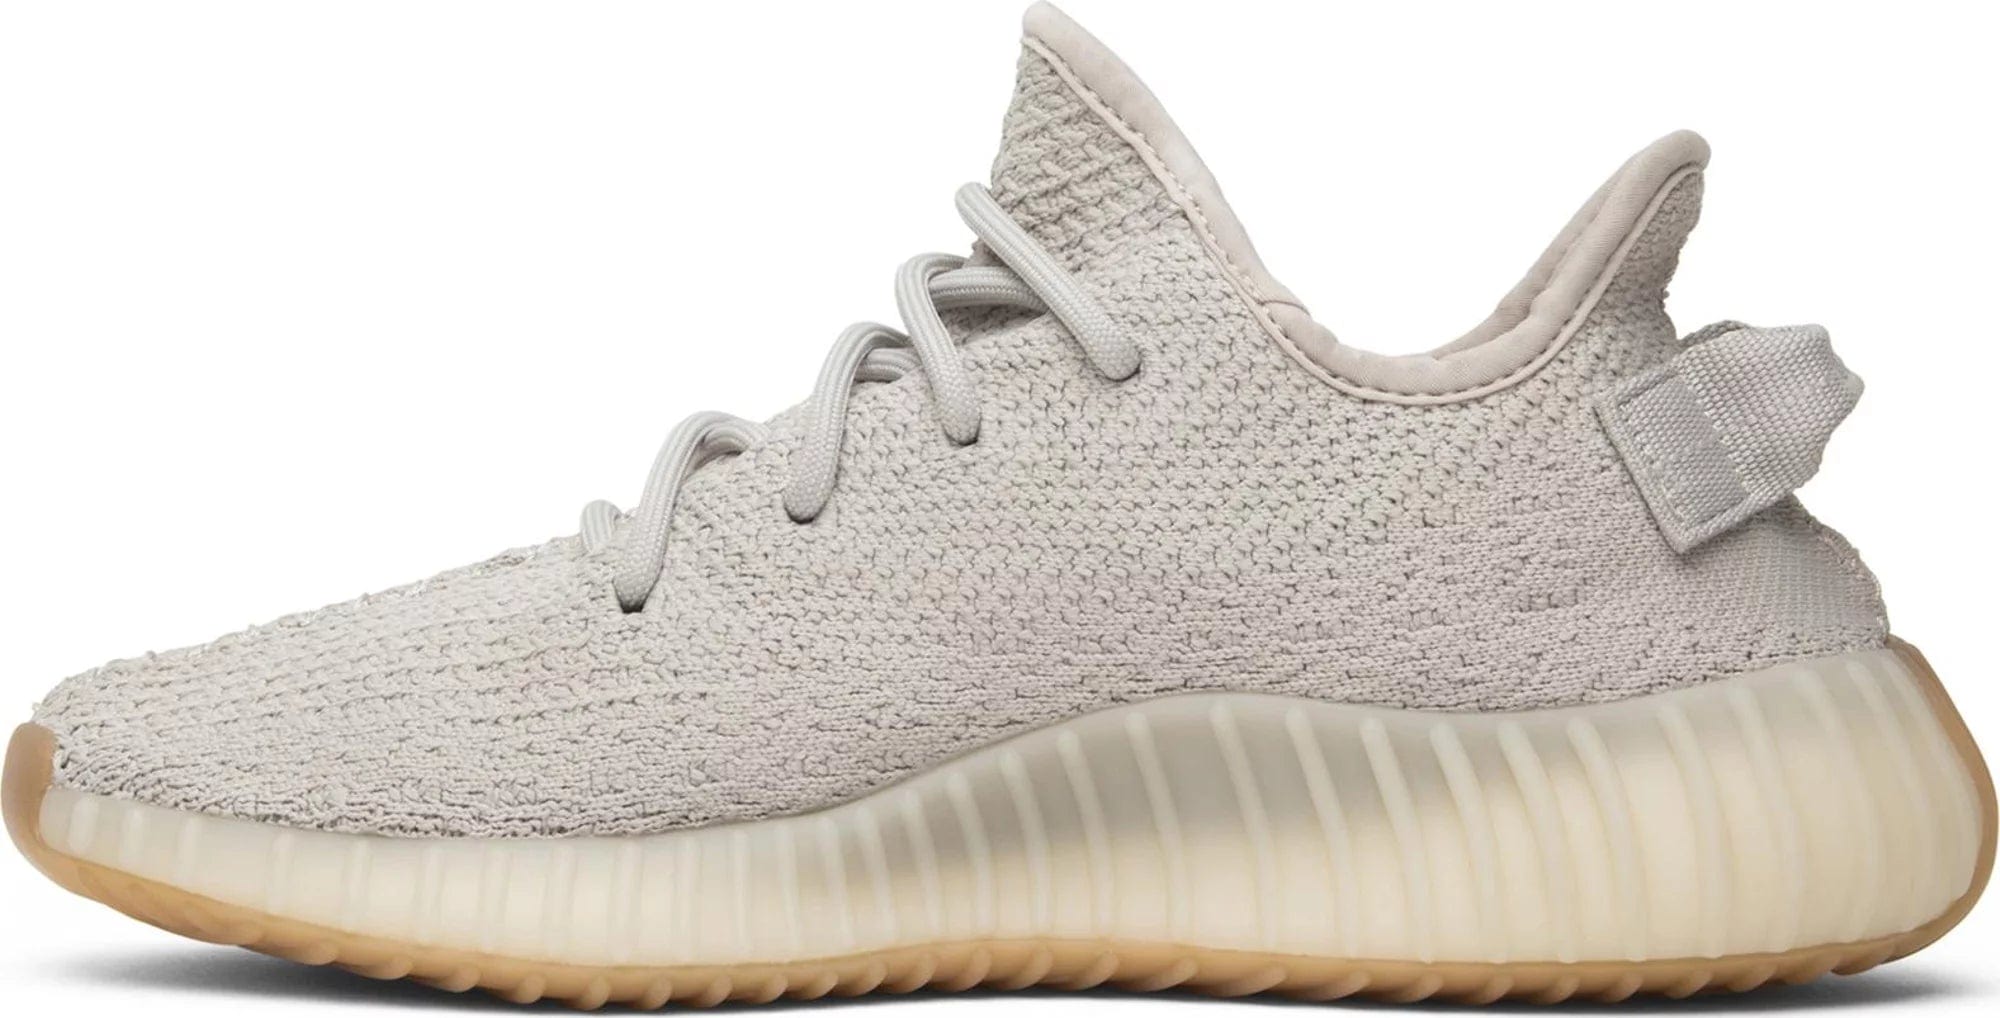 sneakers Adidas Yeezy Boost 350 V2 Sesame